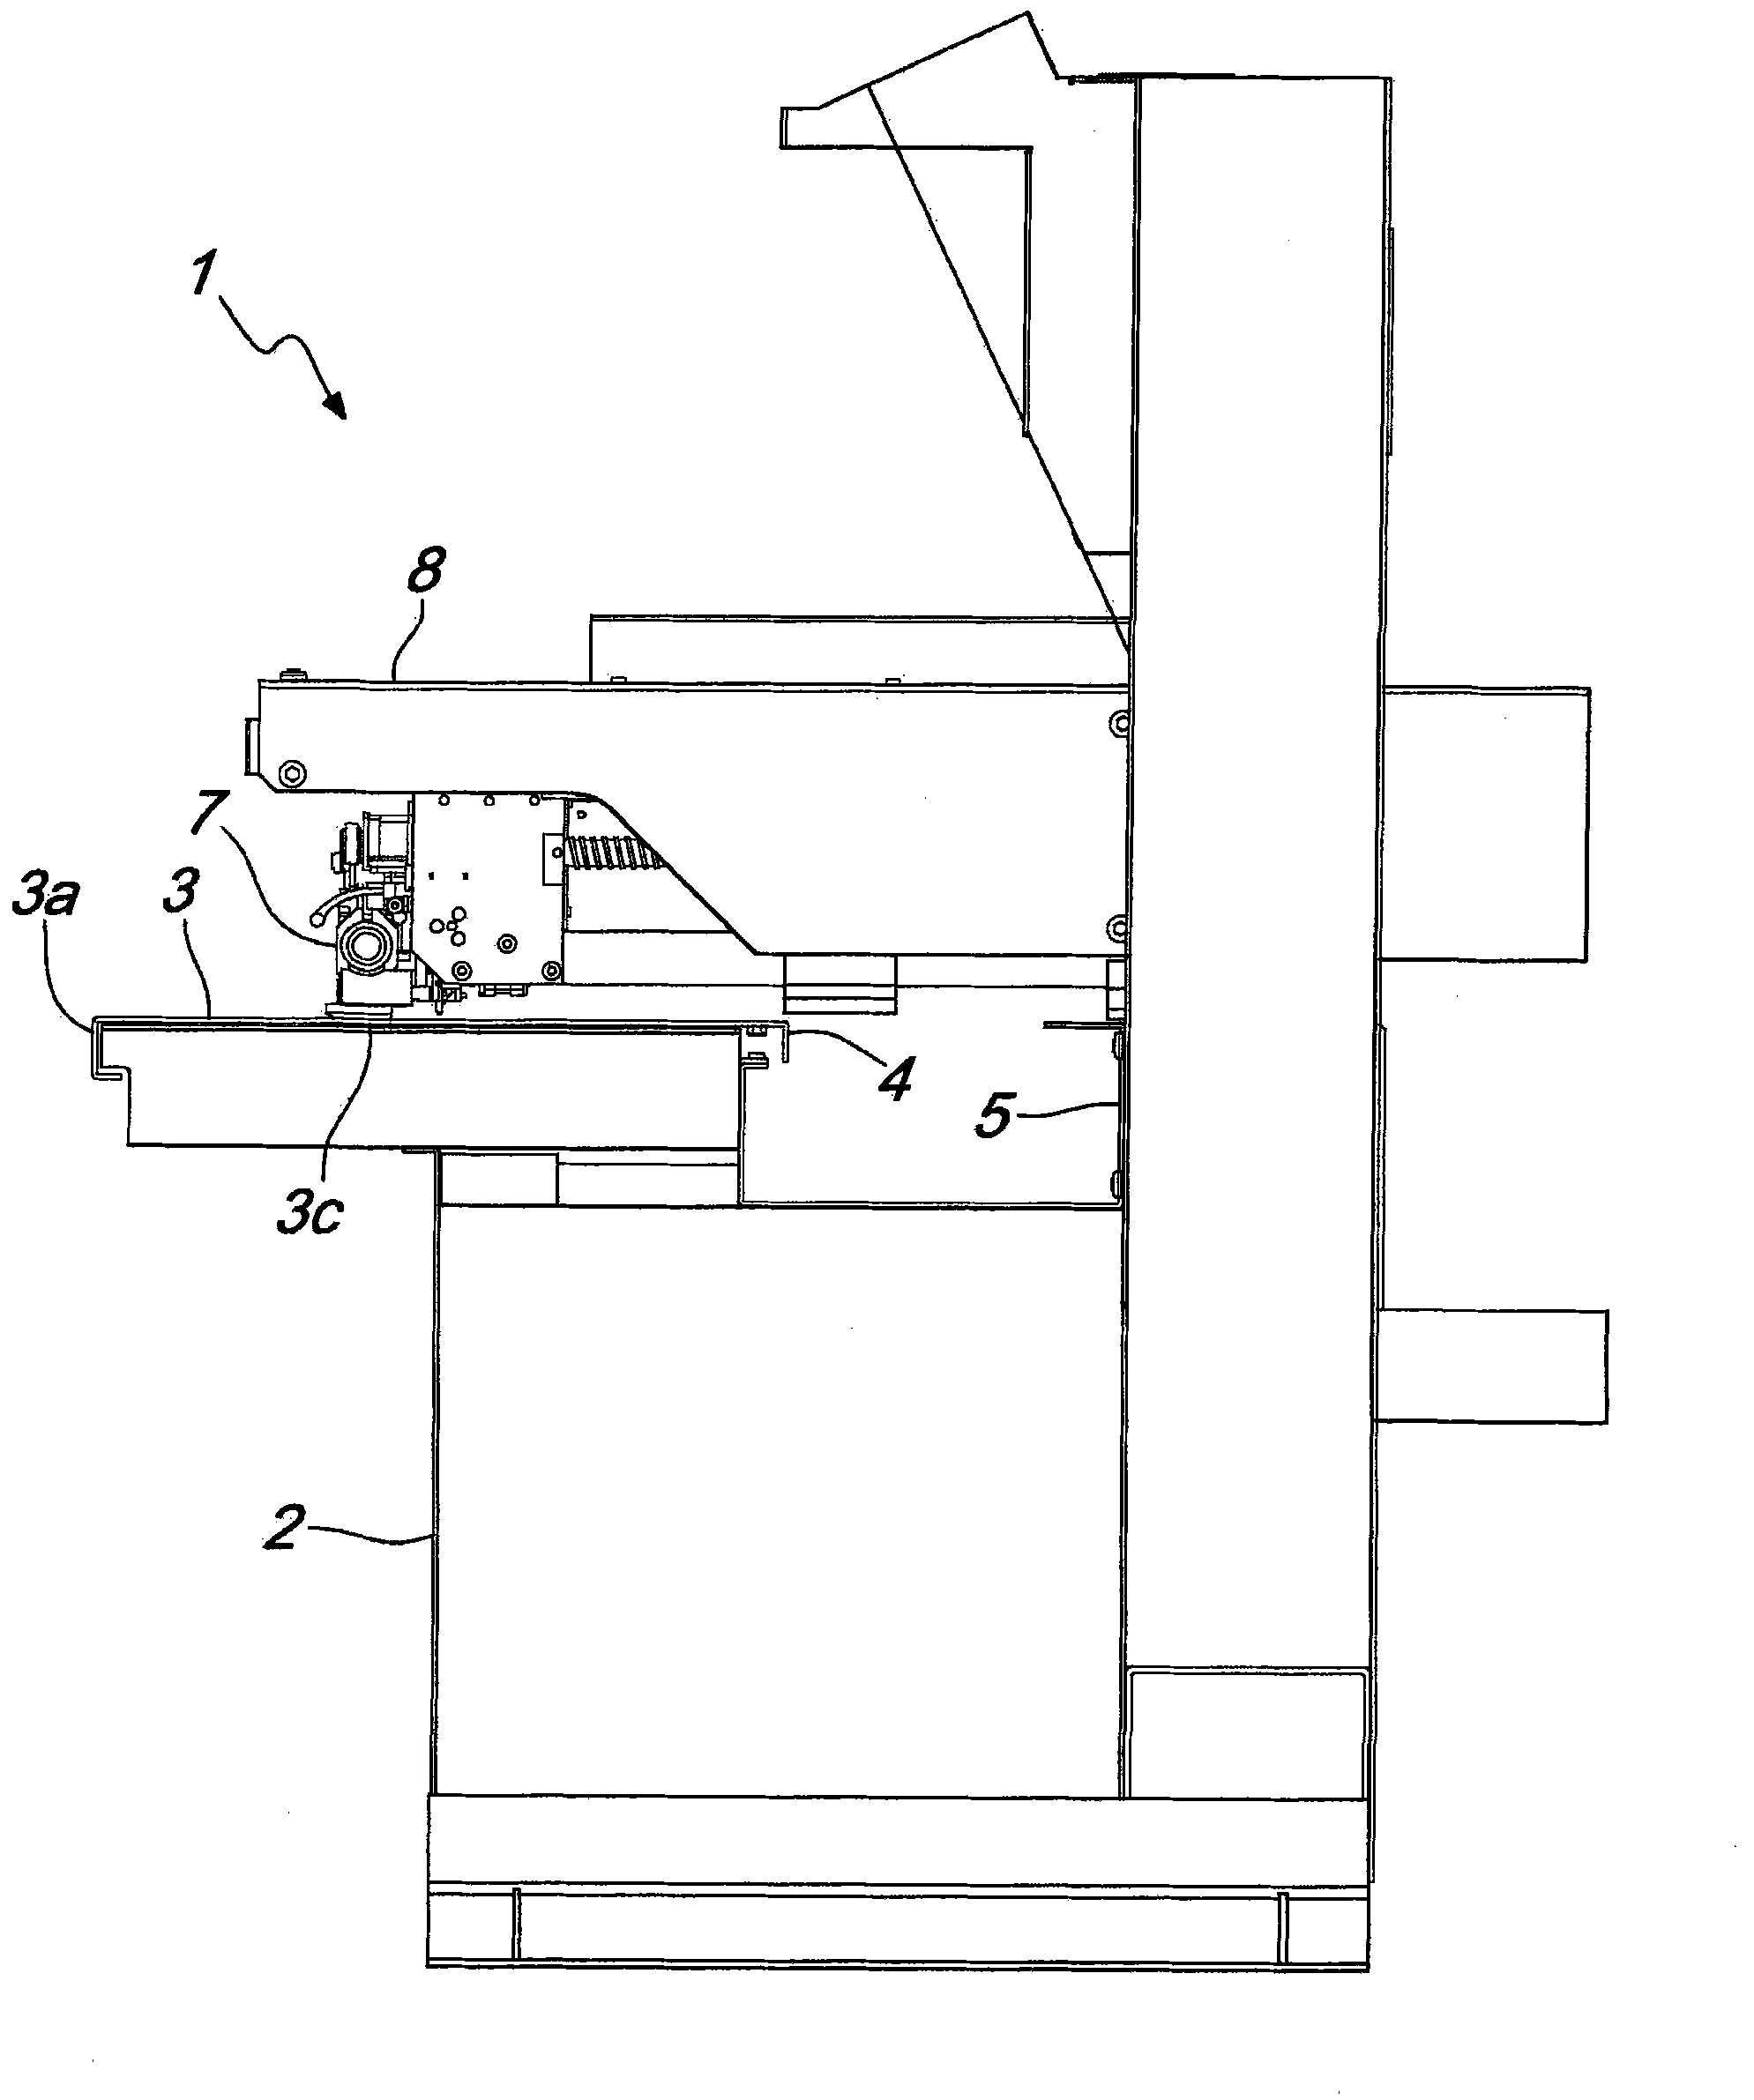 Machine for cutting hides and the like and sheet-like materials in general, with simplified-access worktable